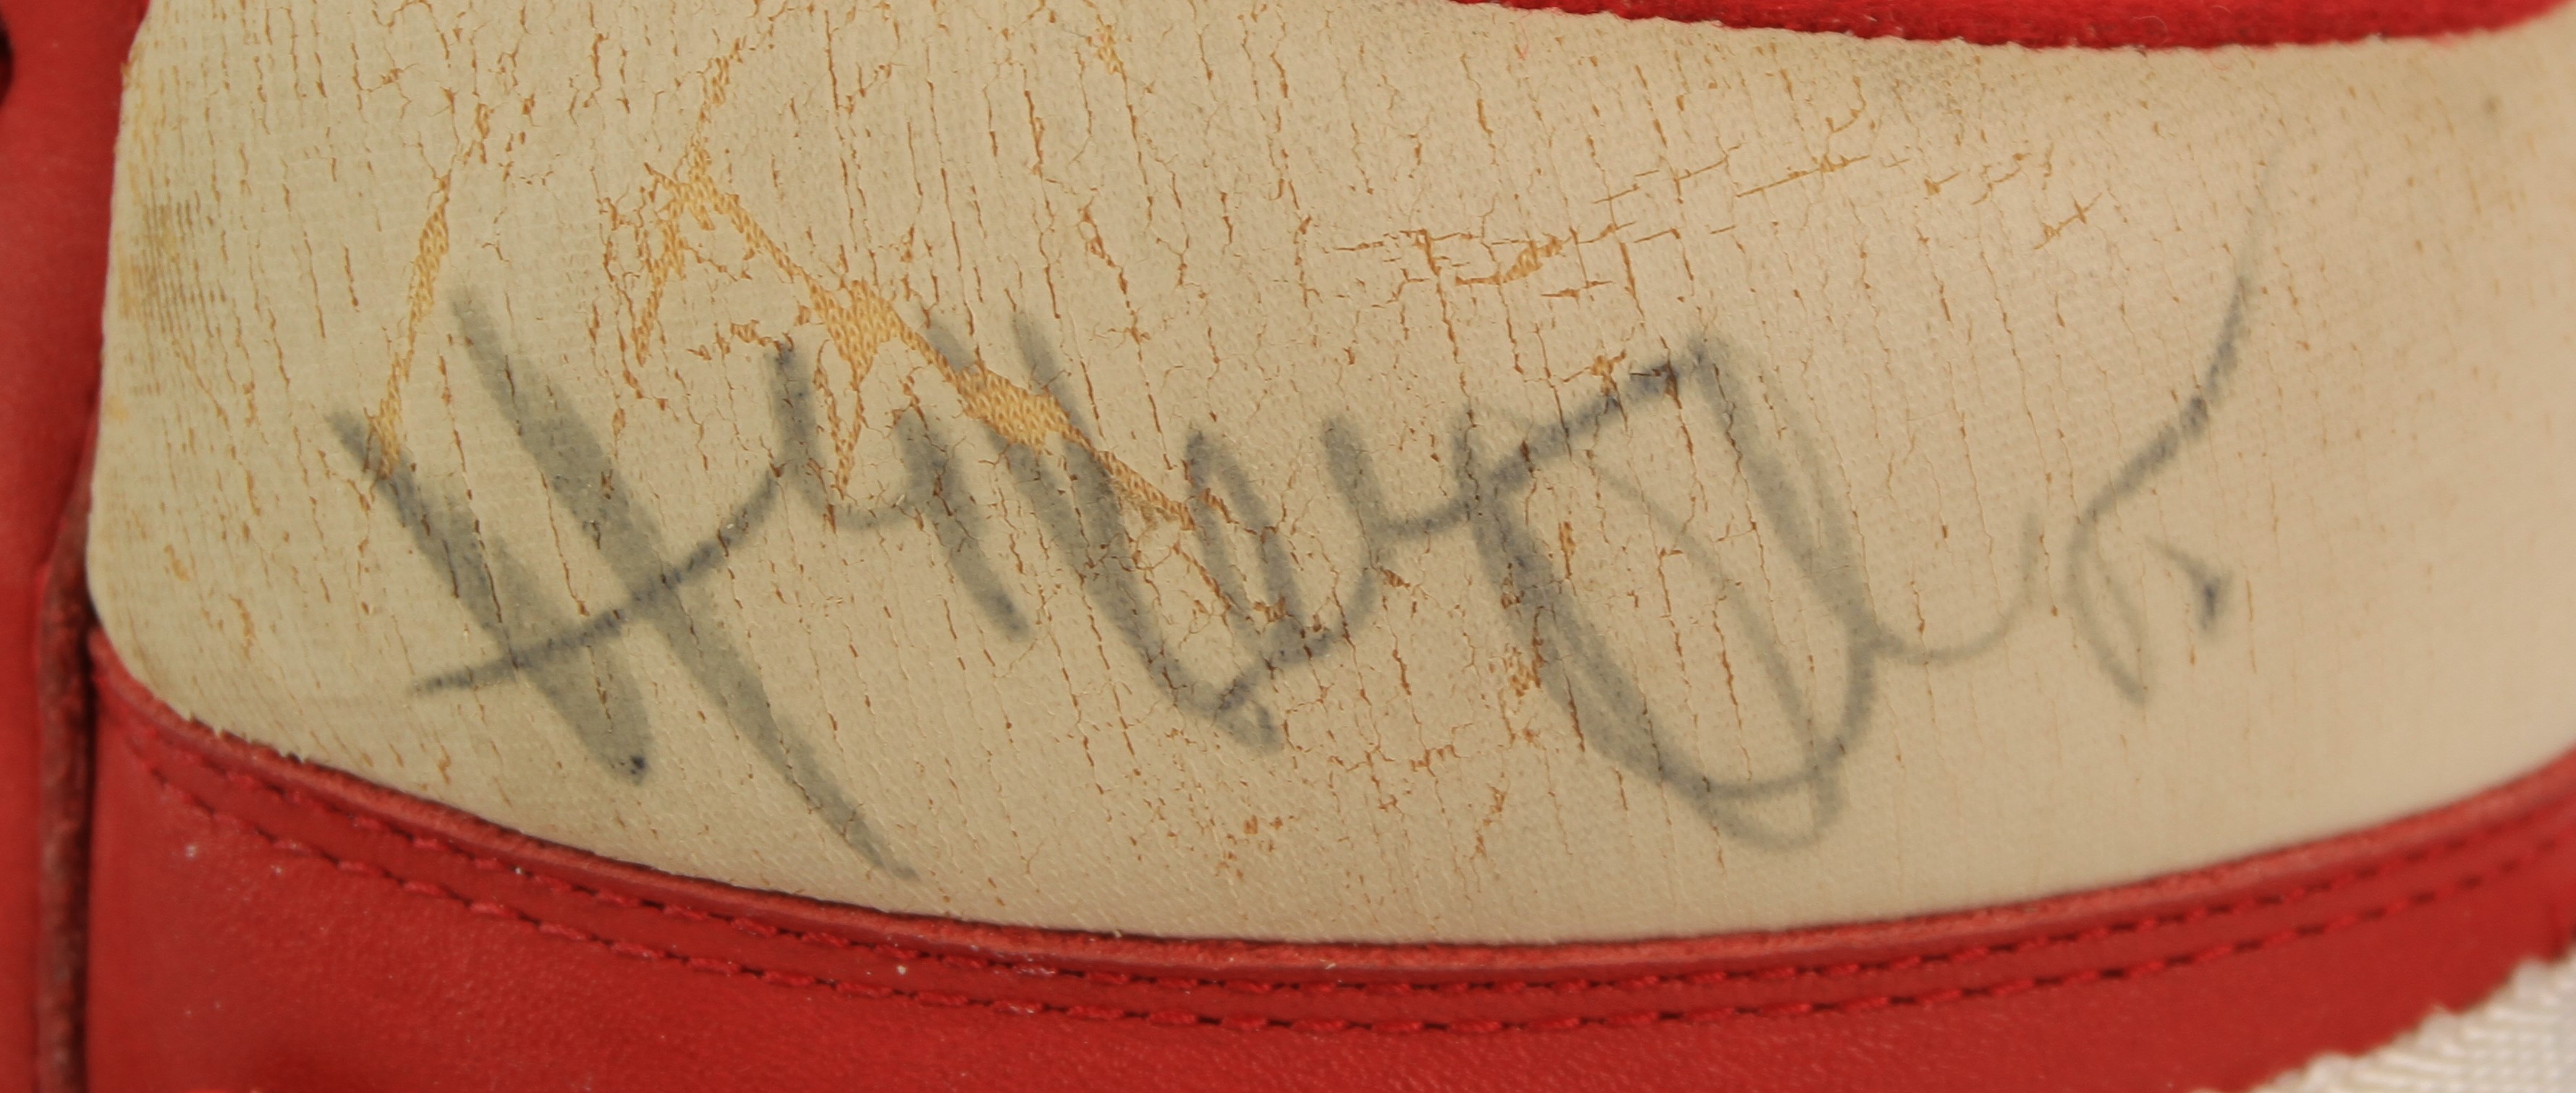 Lot Detail - Hakeem Olajuwon Game Used Autographed L.A. Gear Shoes